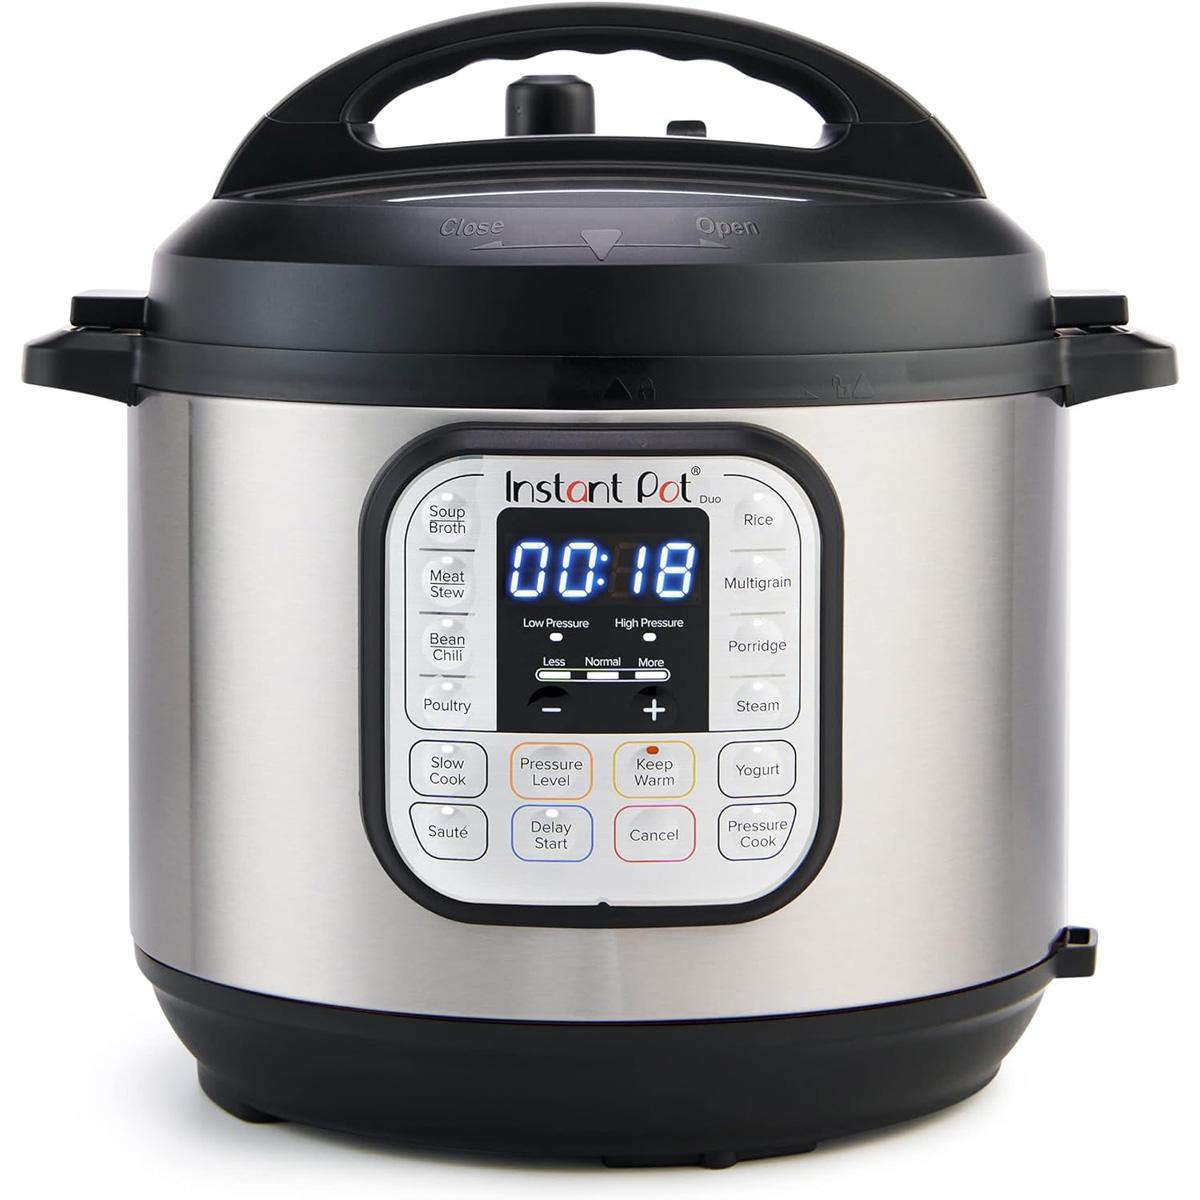 Instant Pot Duo 7-in-1 Electric Pressure Cooker for $50 Shipped